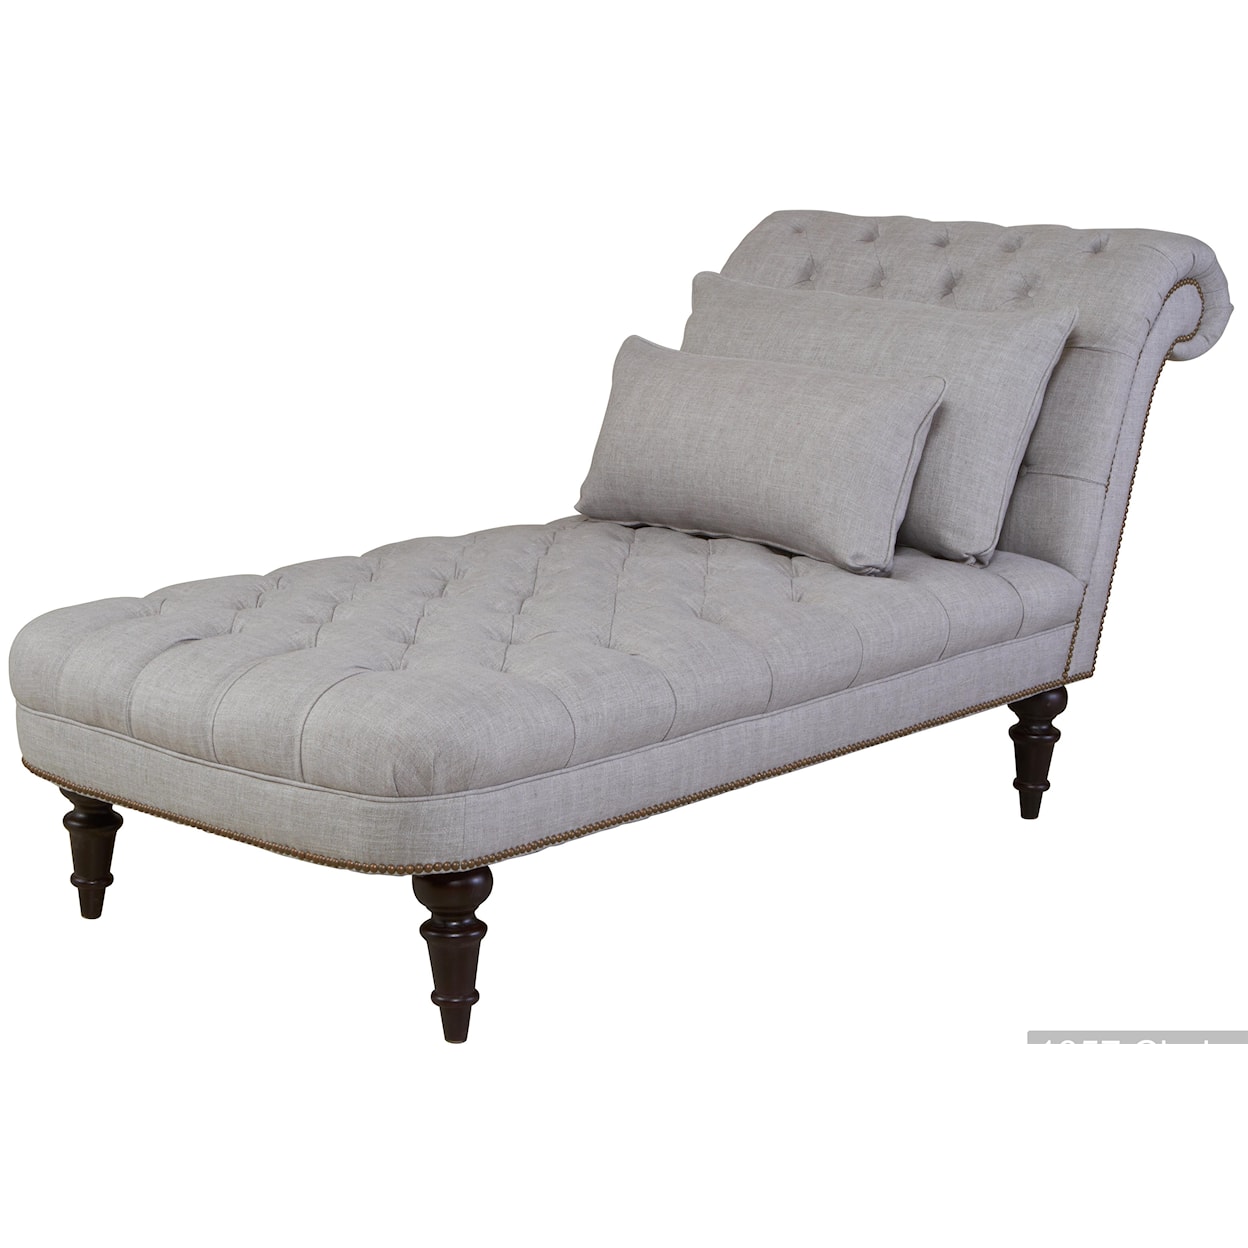 Southern Diana Upholstered Chaise